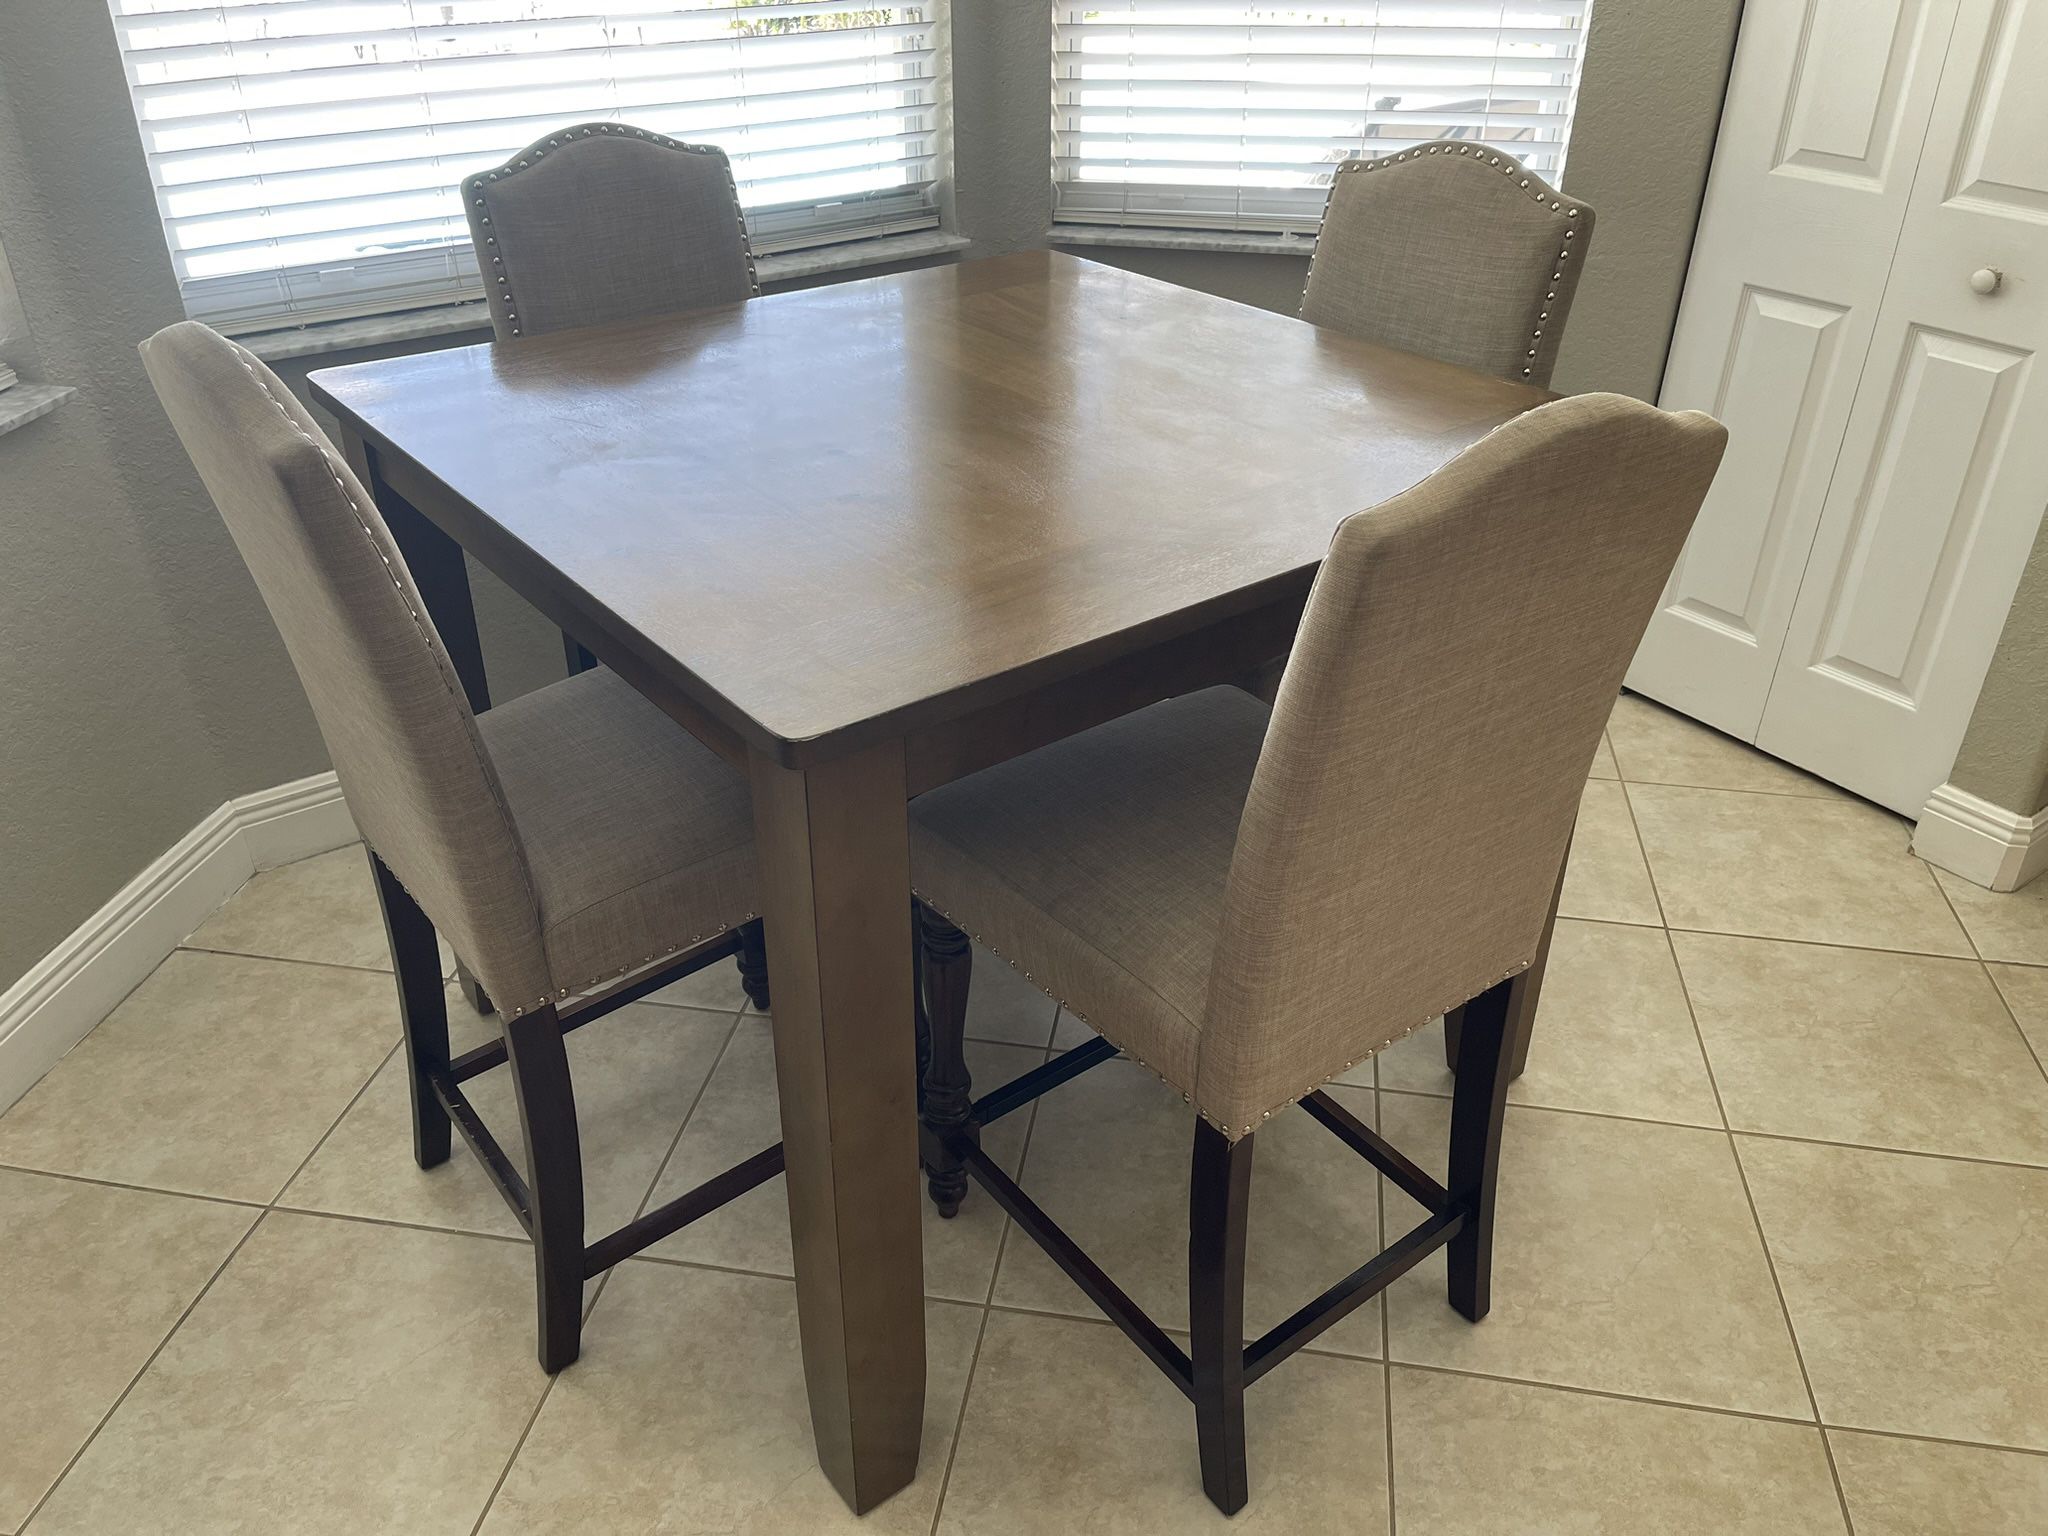 Kitchen Table or Dining Room Table